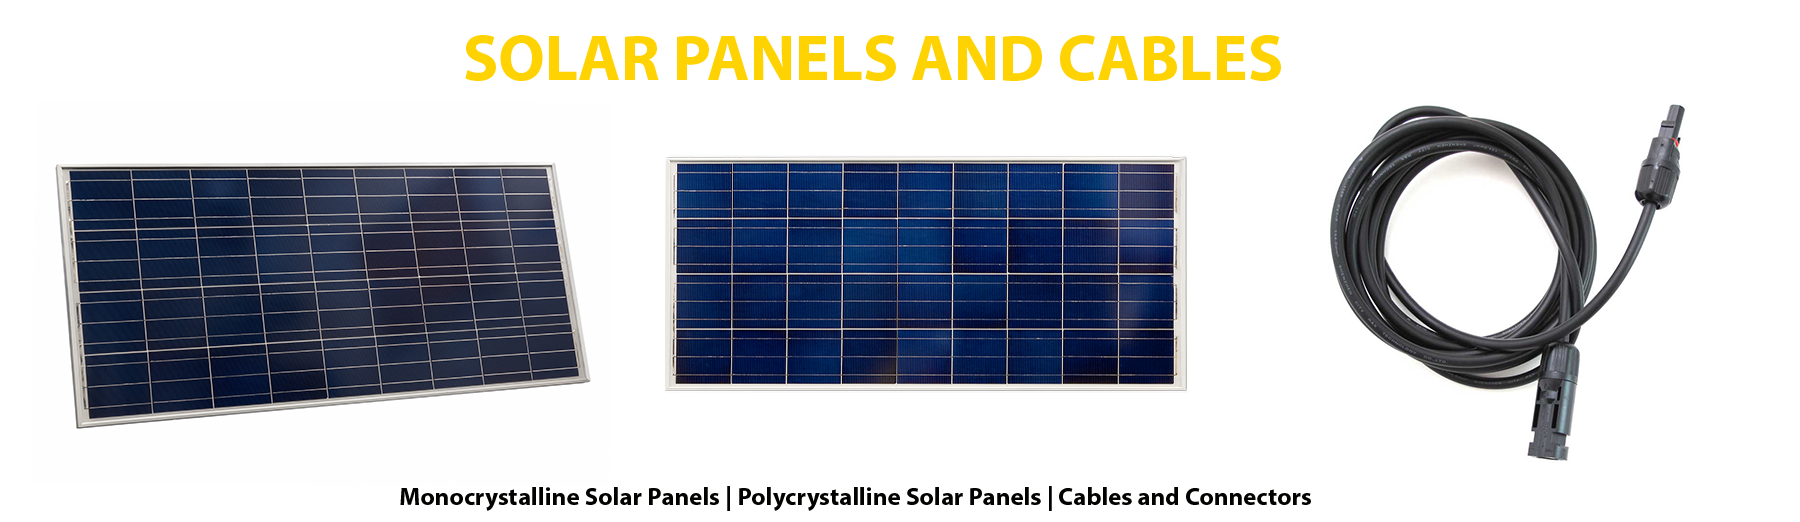 Solar panels and cables